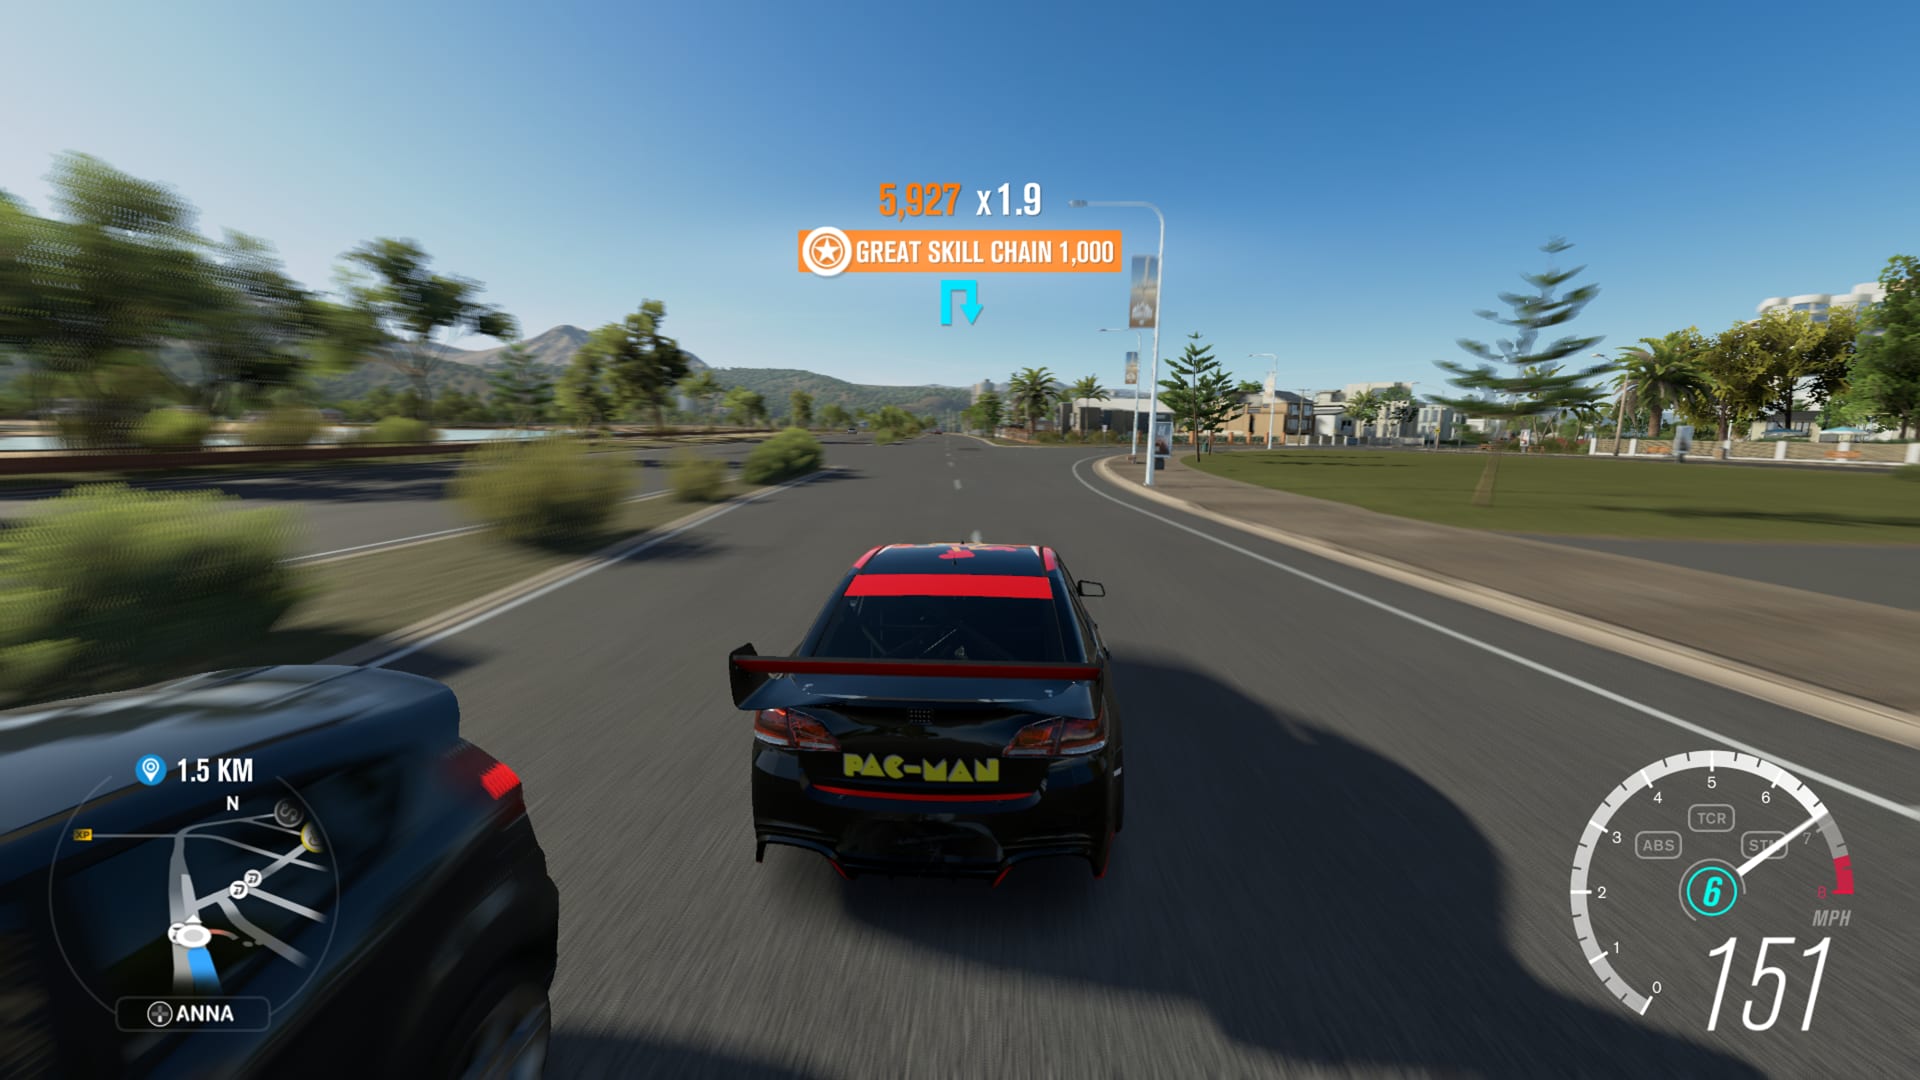 Forza Horizon 3 tips to guide you to victory